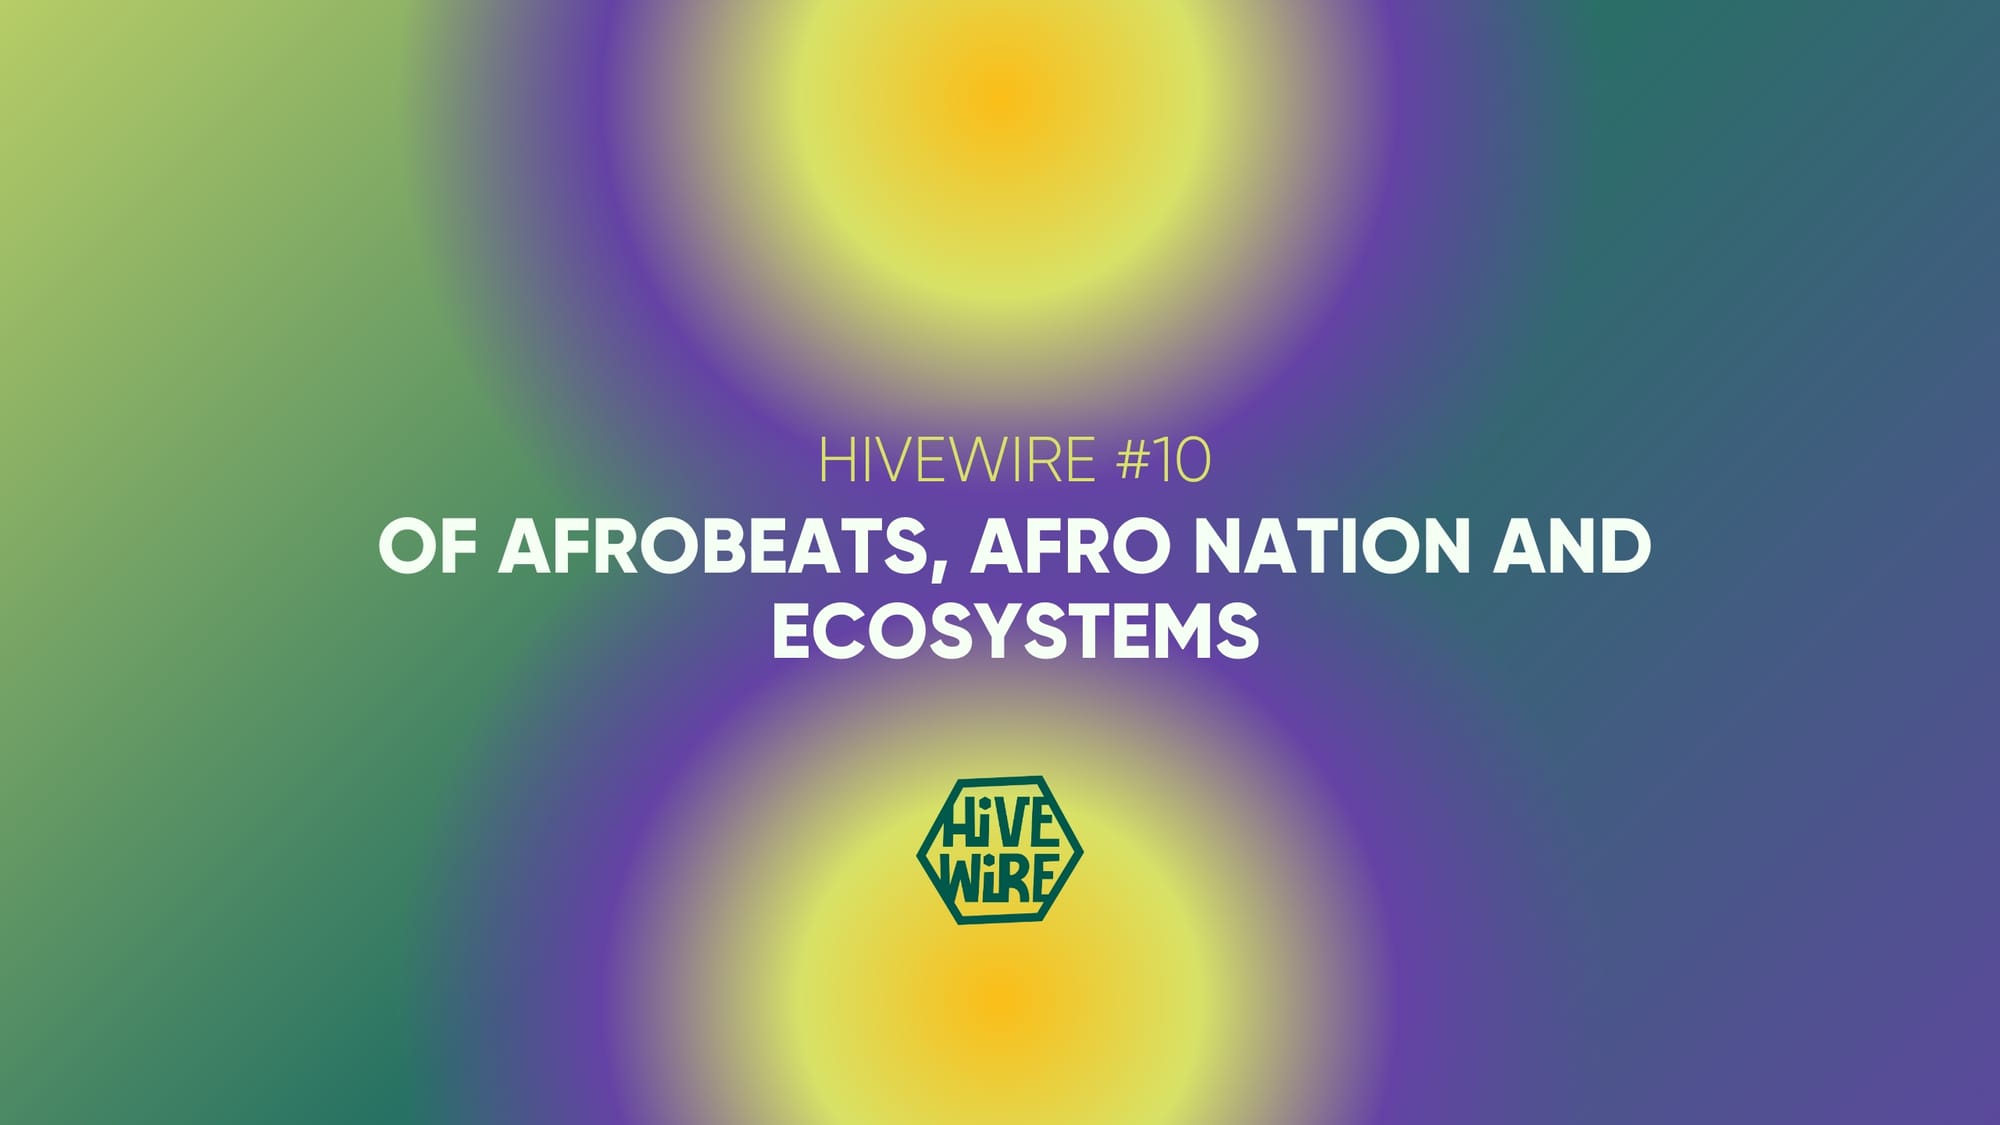 HIVEWIRE #10: Of Afrobeats, Afro Nation and Ecosystems: An Afro-Nation Case Study On The Value Of Interconnectedness